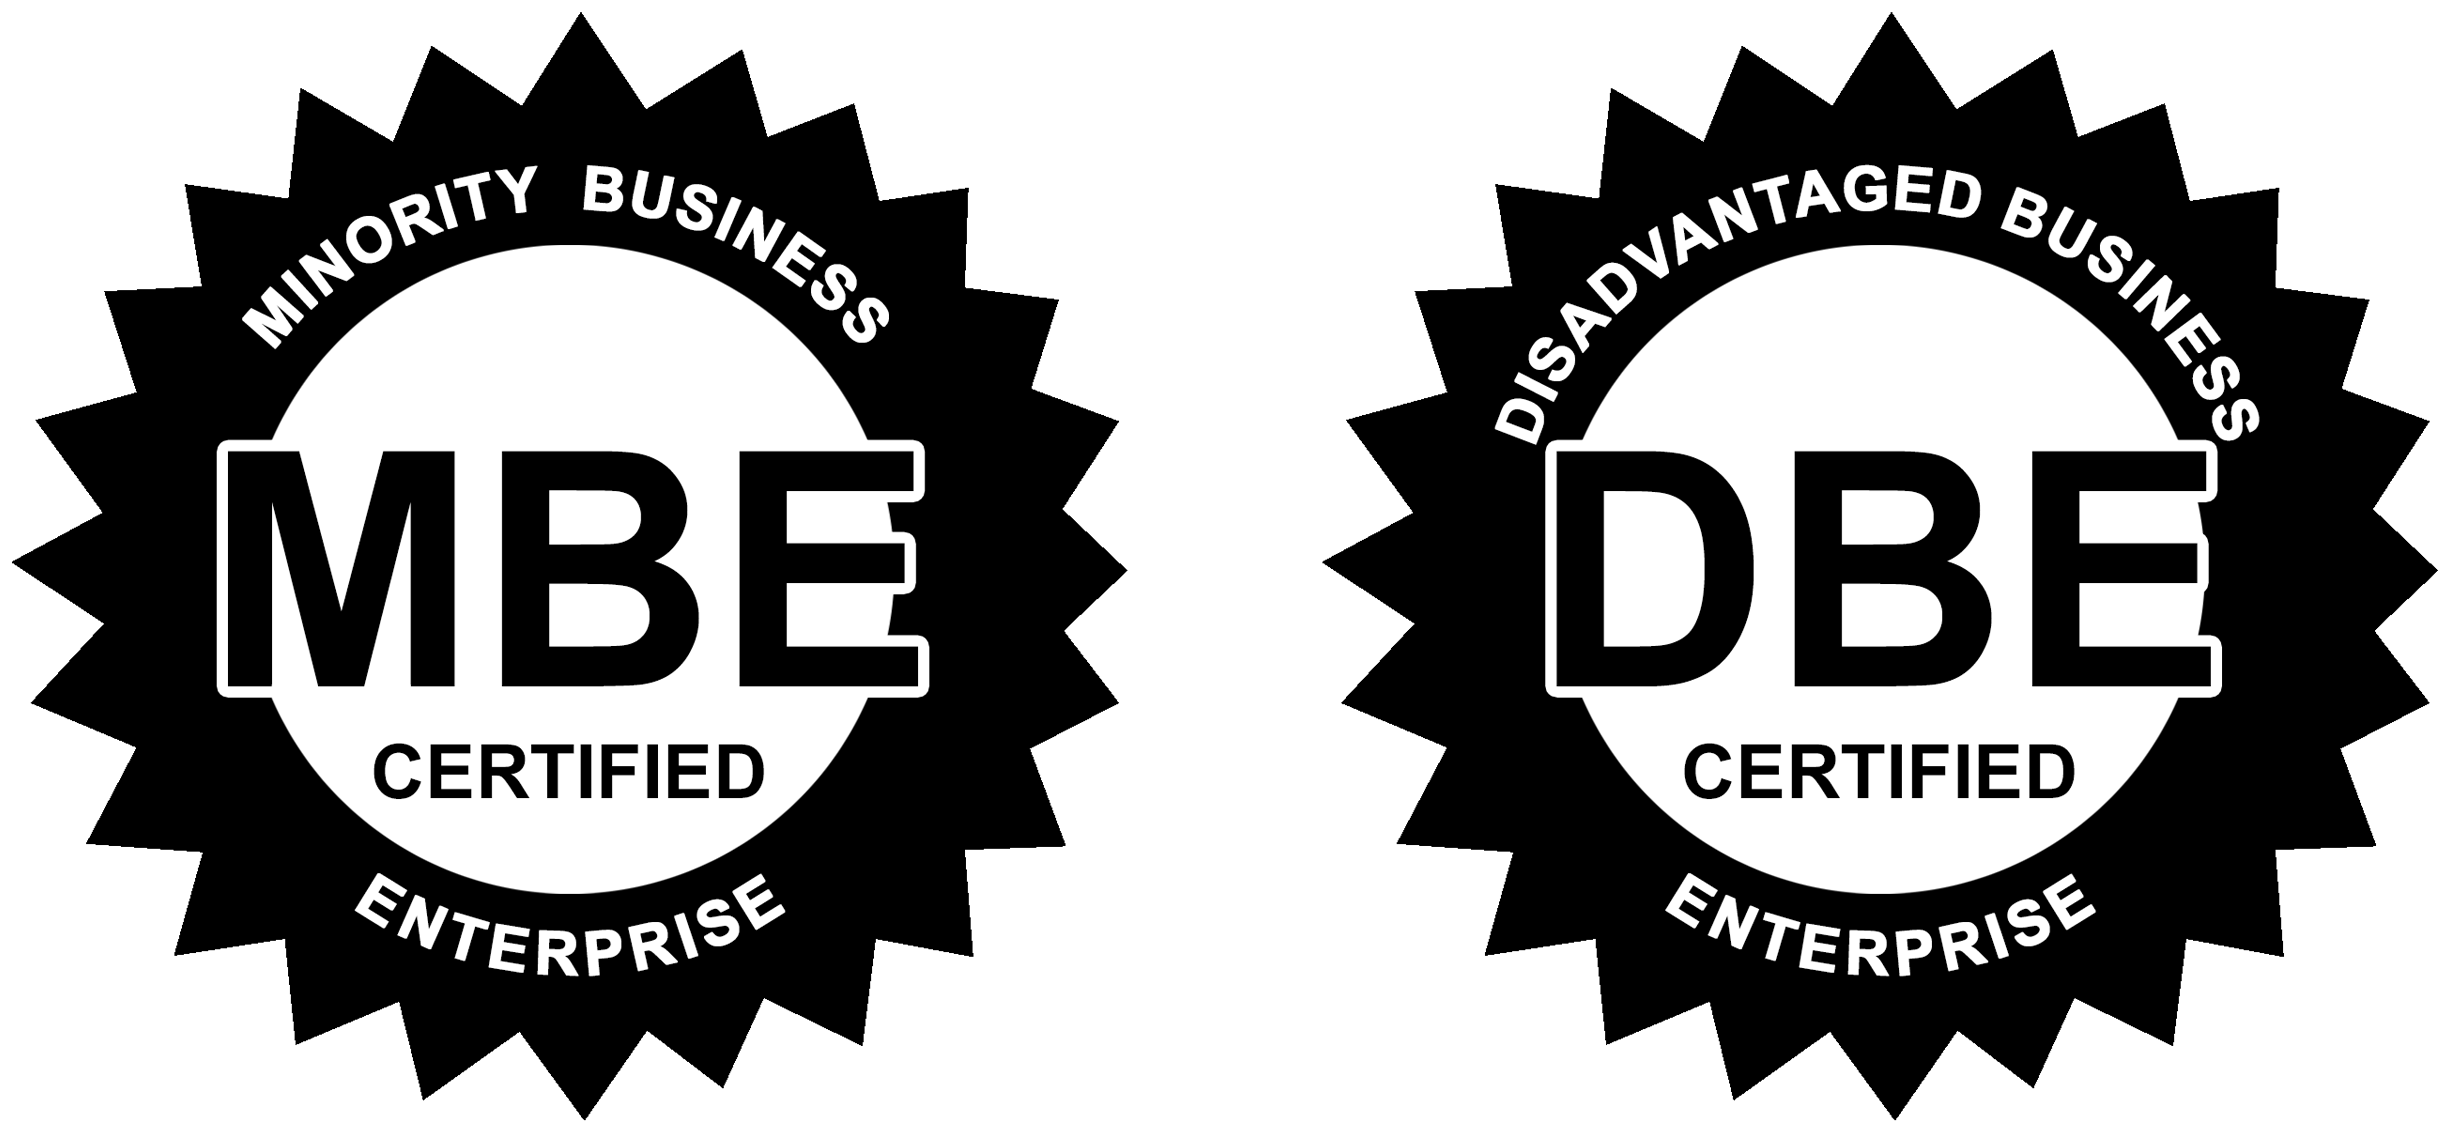 MBE DBE Certification